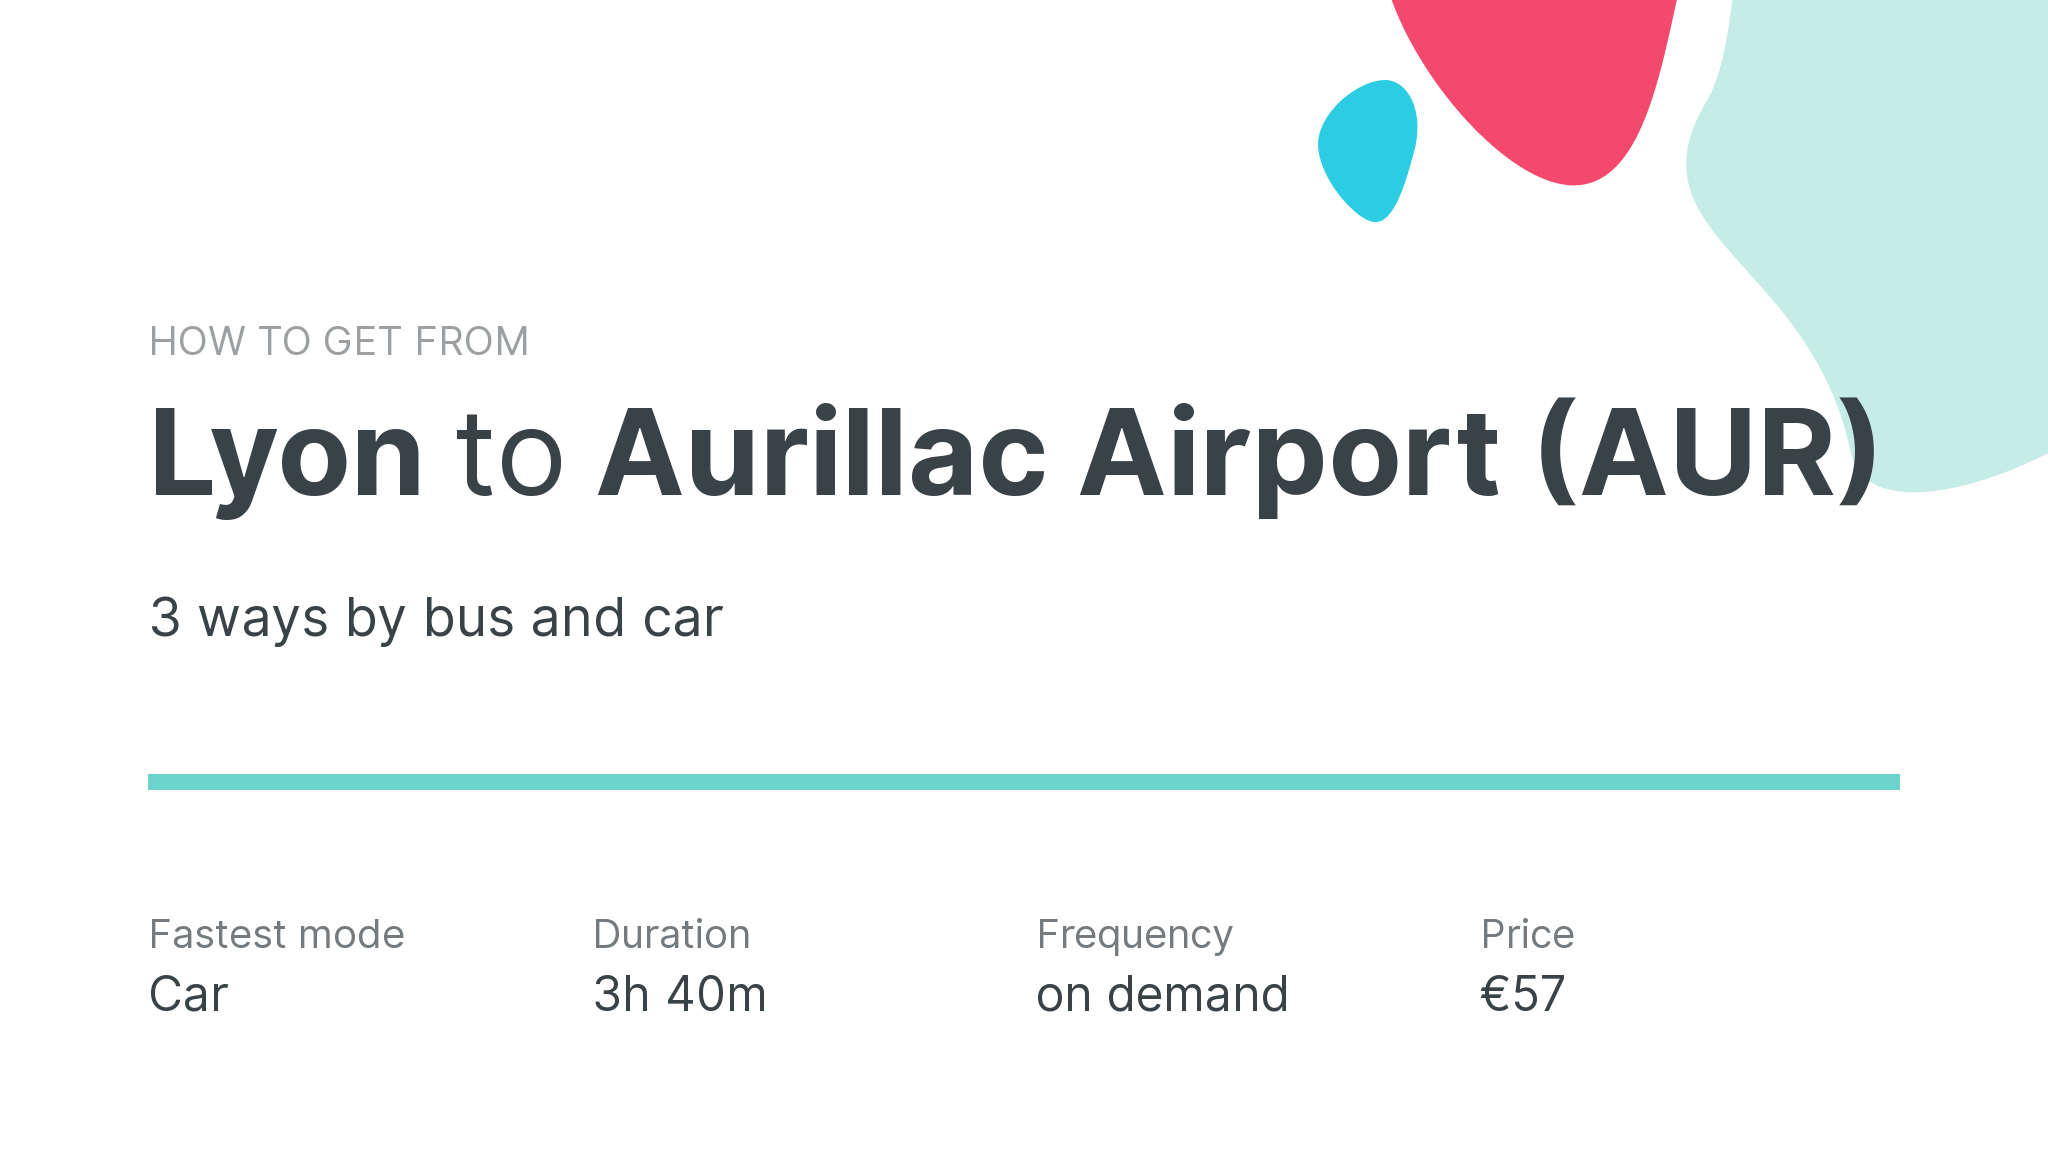 How do I get from Lyon to Aurillac Airport (AUR)